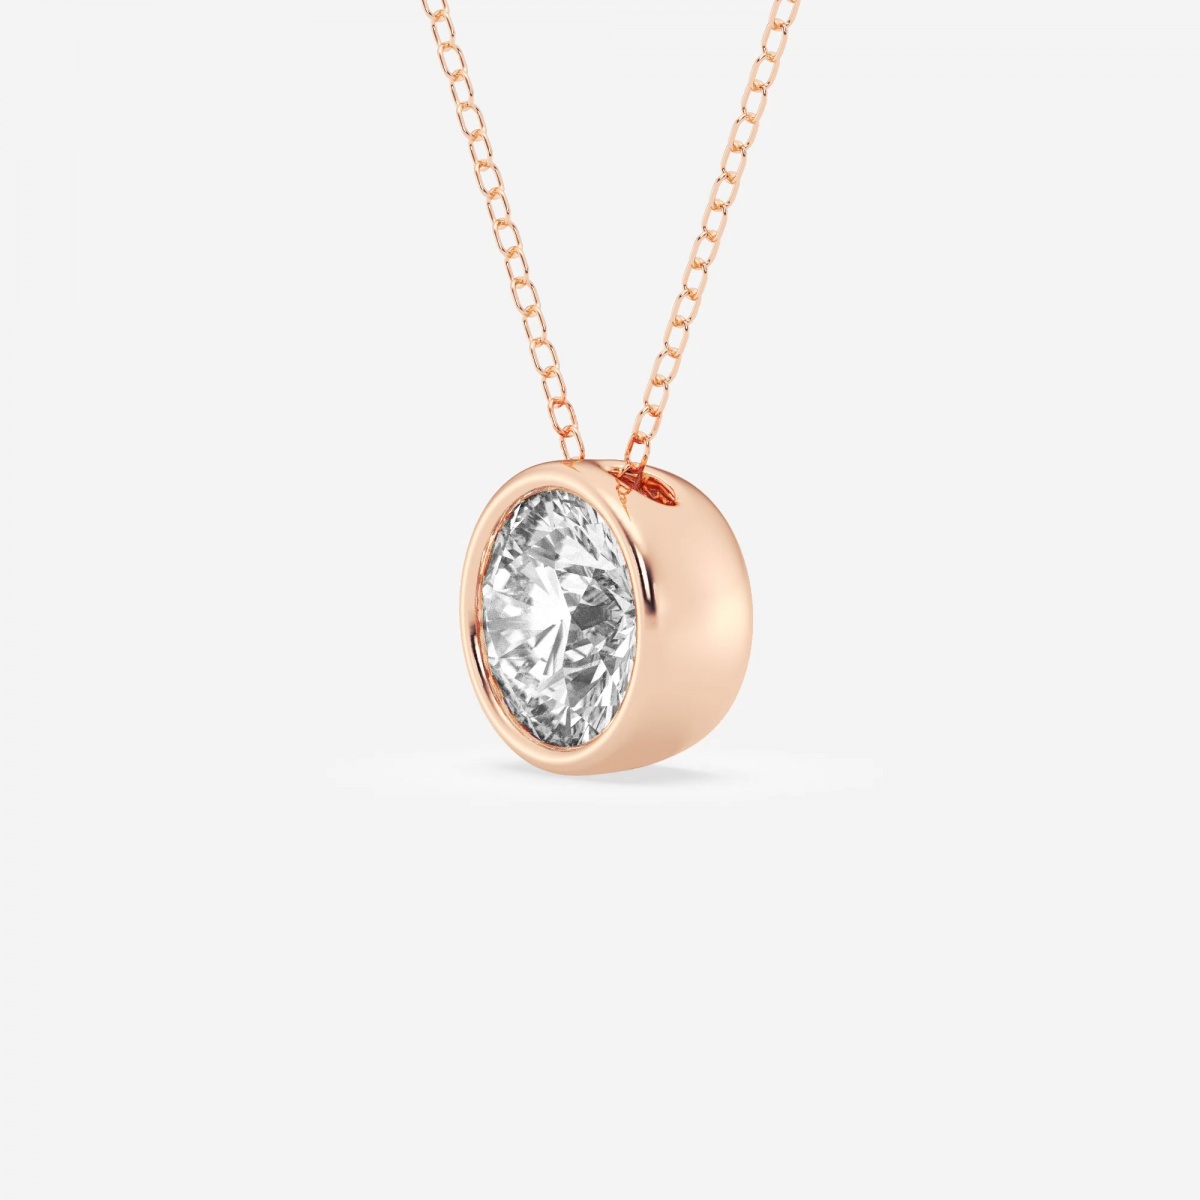 Additional Image 1 for  2 ctw Round Lab Grown Diamond Bezel Set Solitaire Pendant with Adjustable Chain